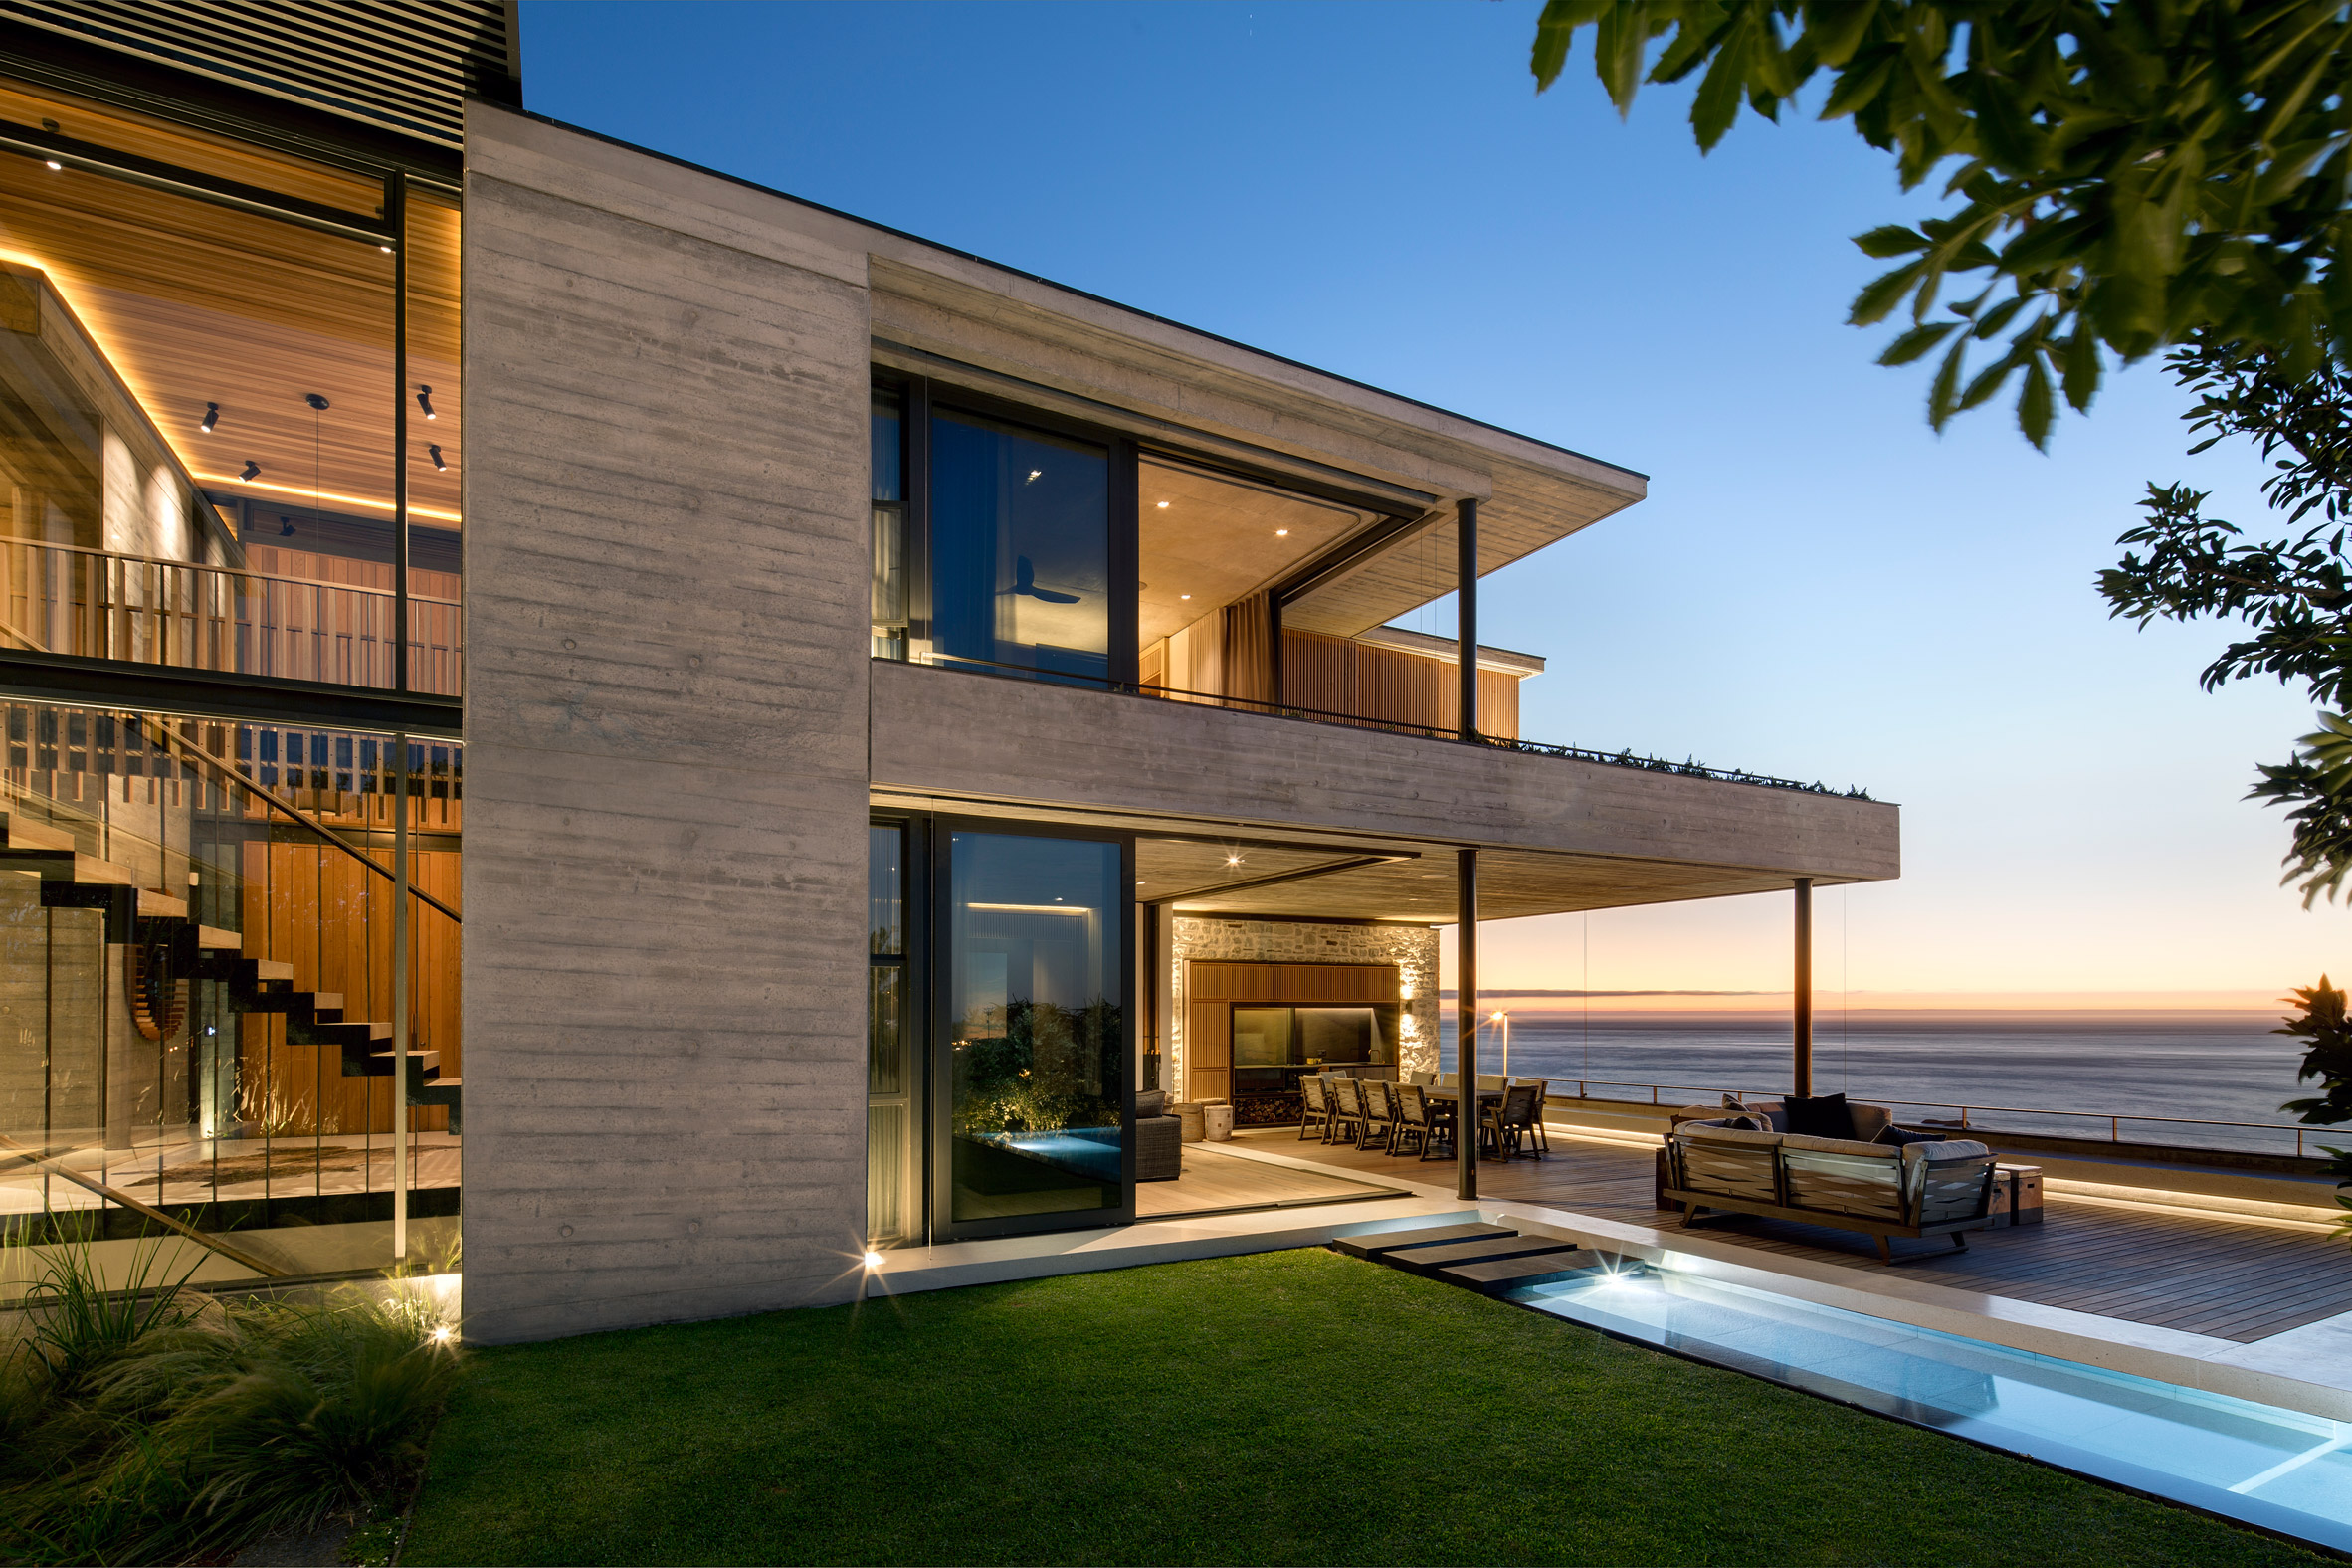 Local architecture firm Malan Vorster designs seaside Clifton House in Cape Town